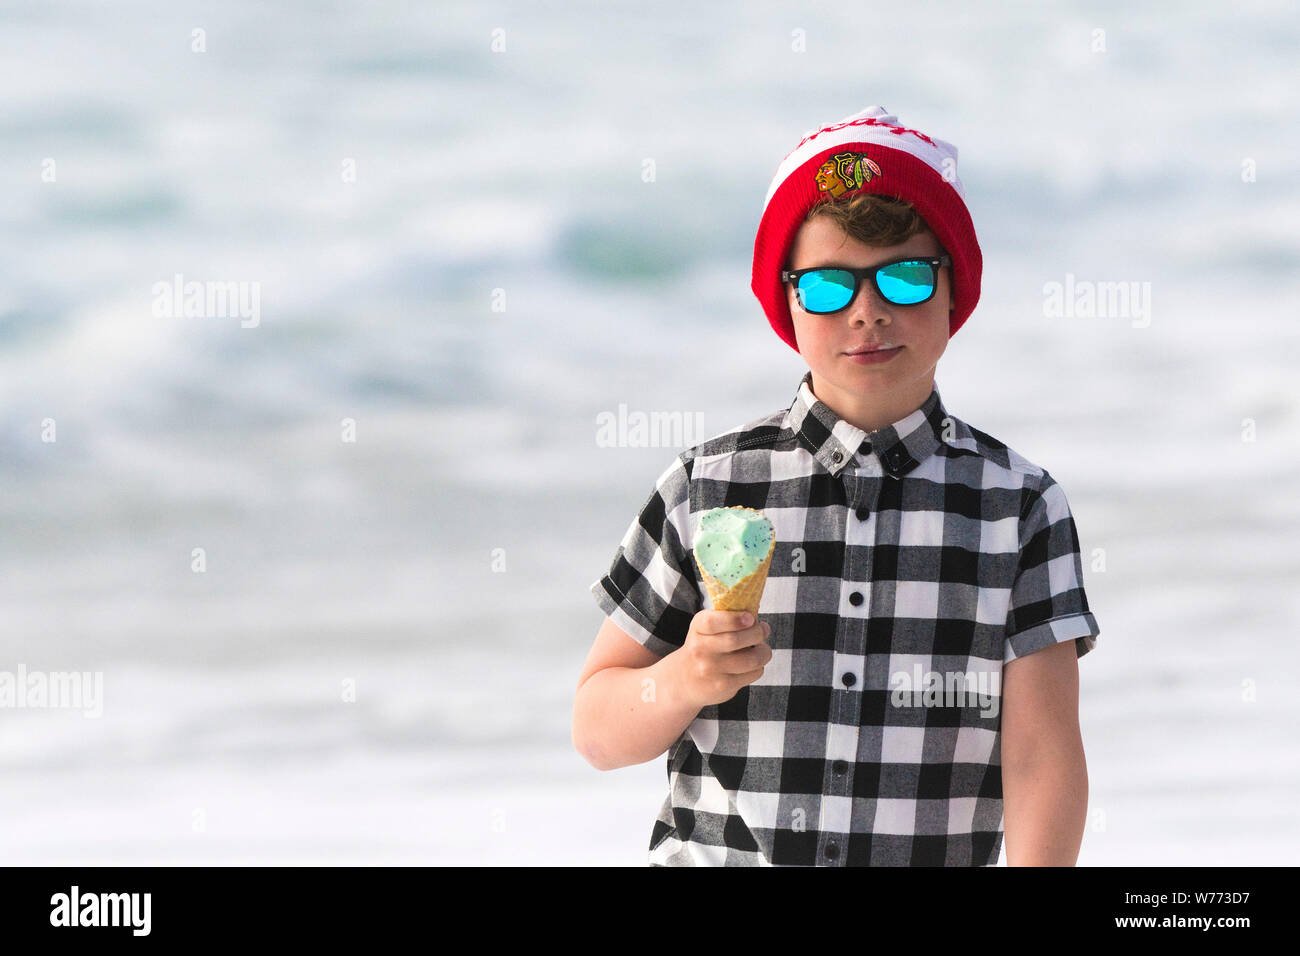 A young boy wearing reflective sunglasses, check shirt and a Chicago Blackhawks bobble hat eating an ice cream. Stock Photo